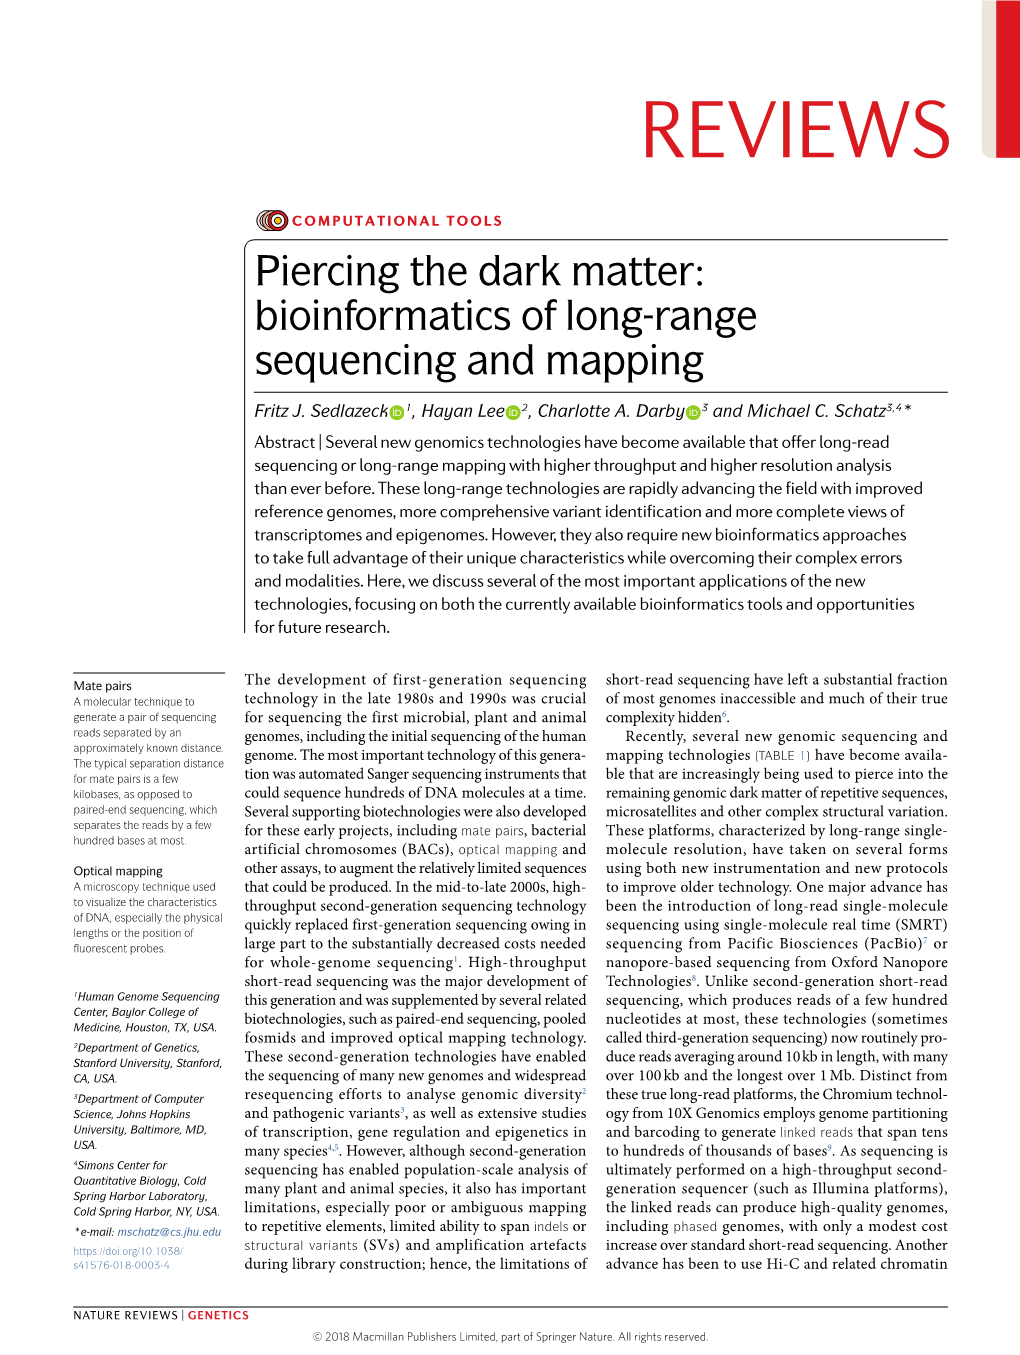 Bioinformatics of Long-Range Sequencing and Mapping